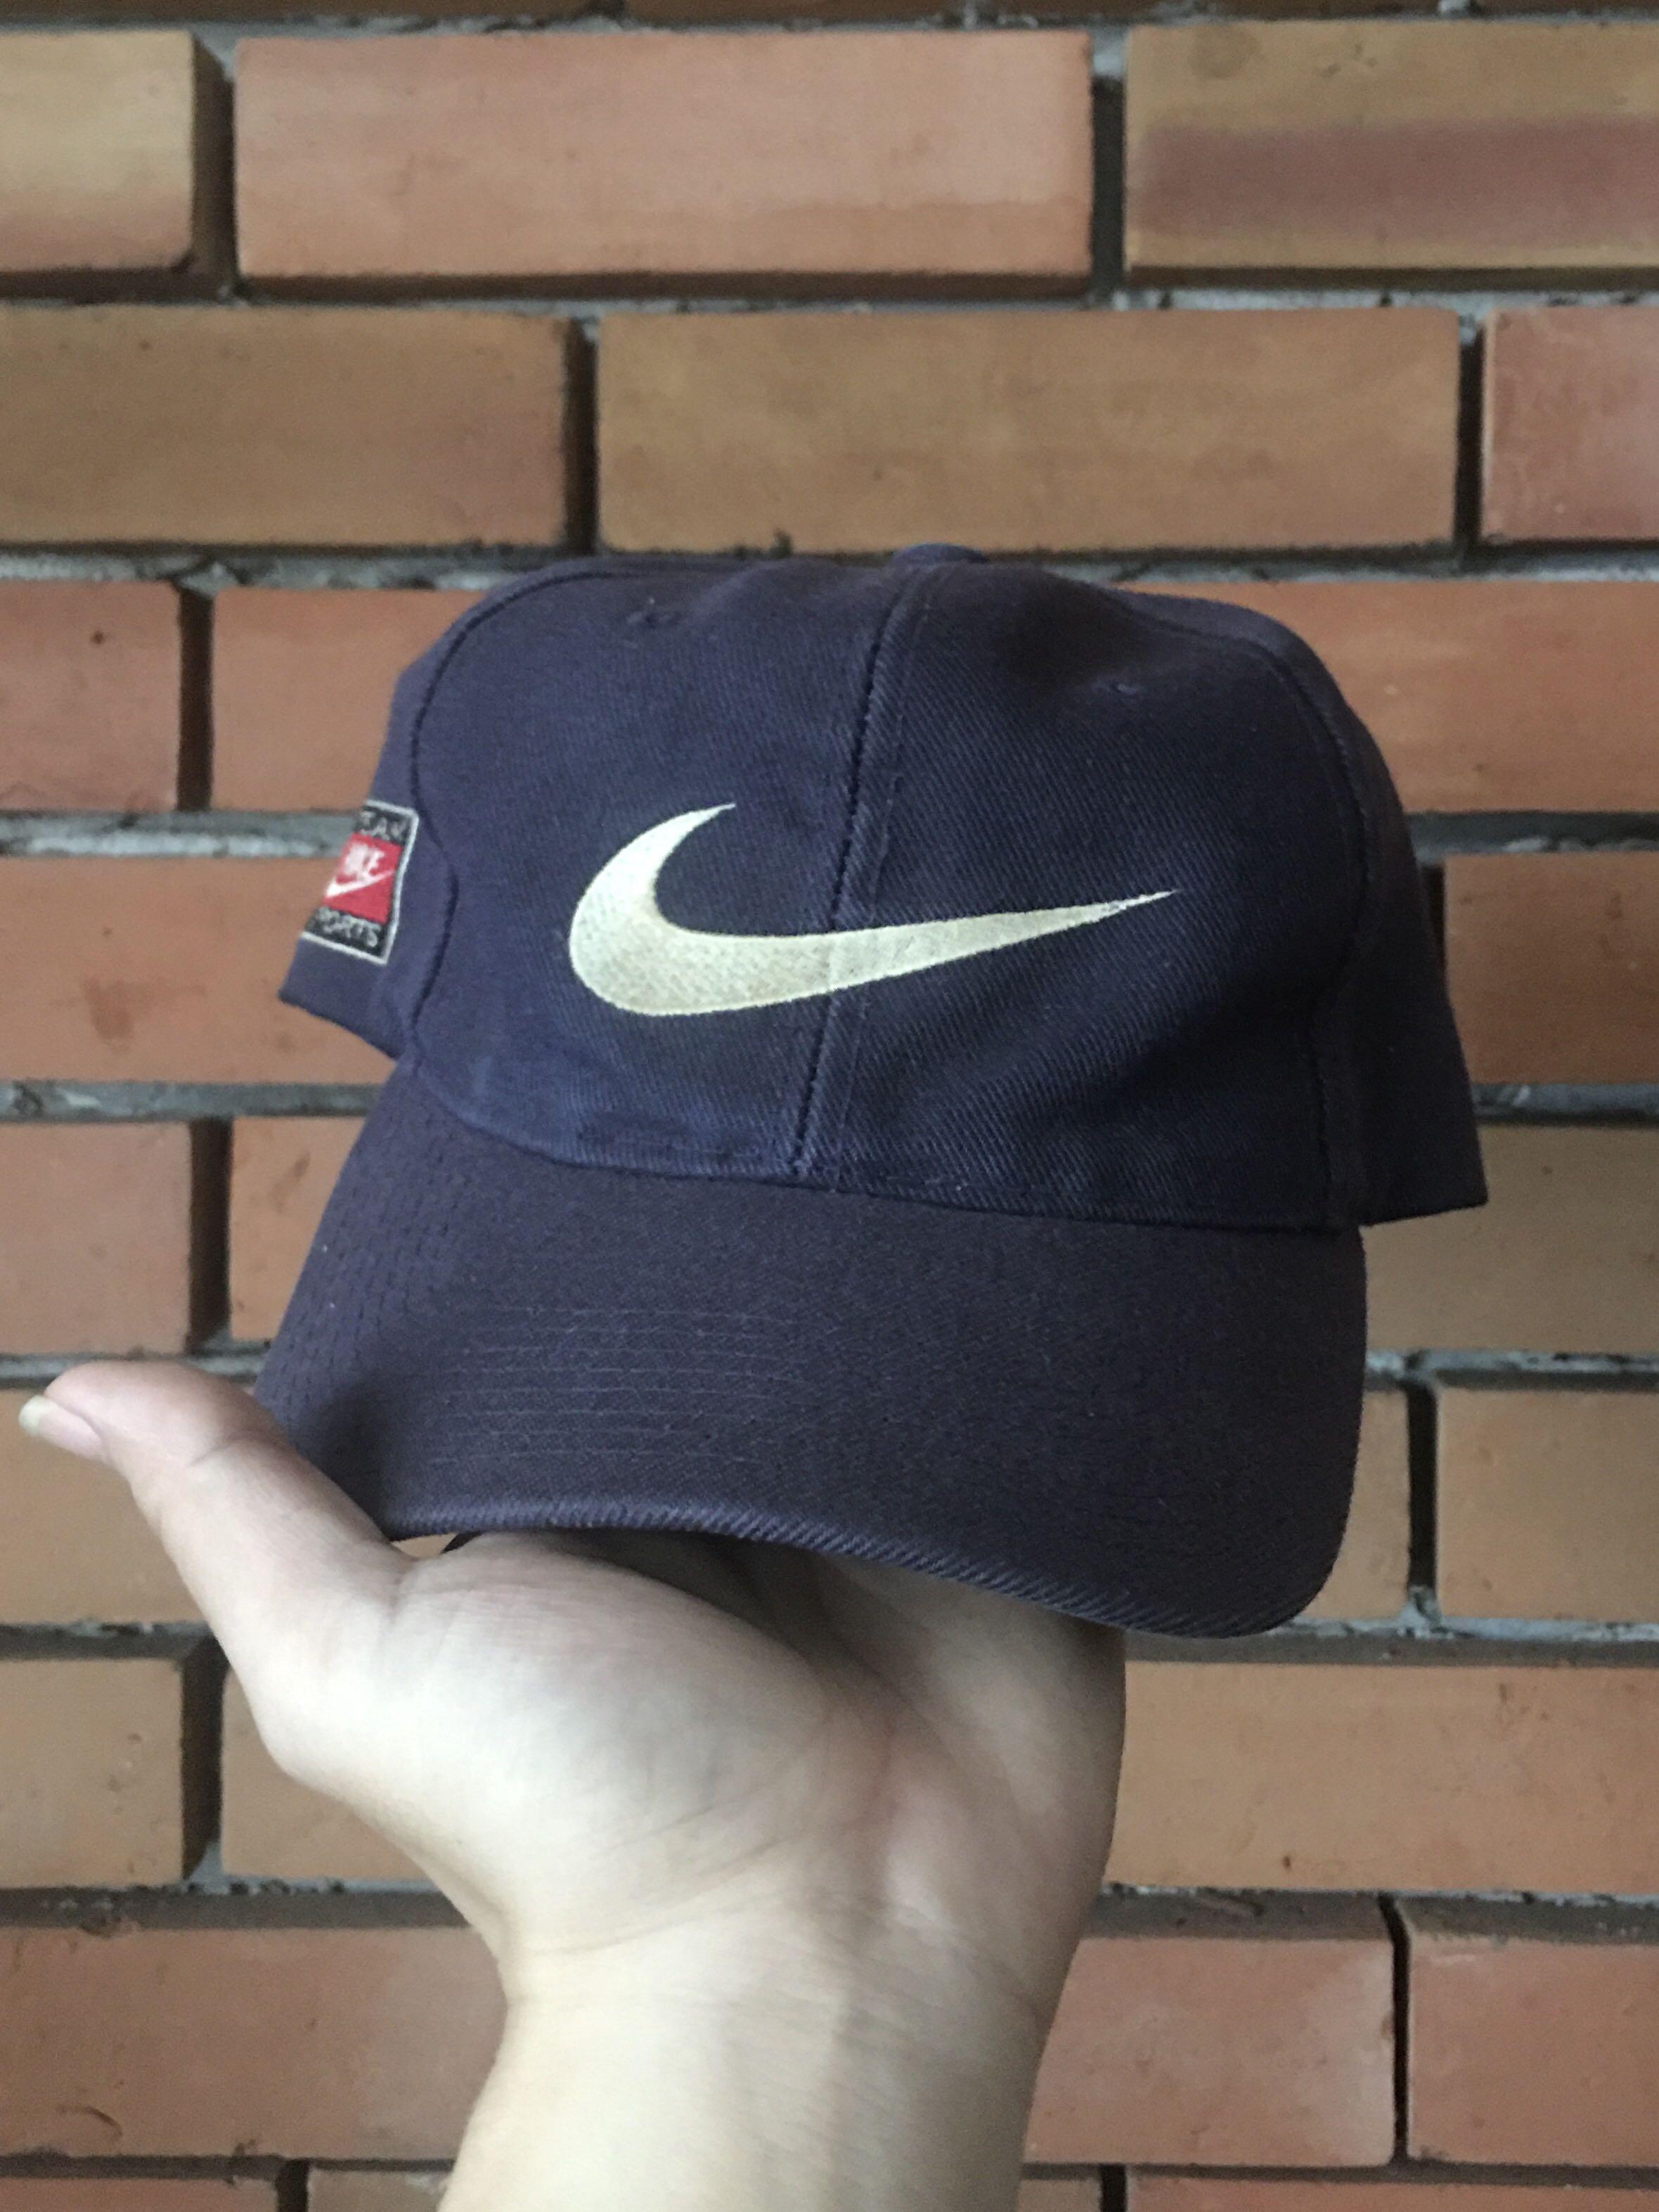 Nike vintage Men's Fashion, Watches & Accessories, Caps & Hats on Carousell